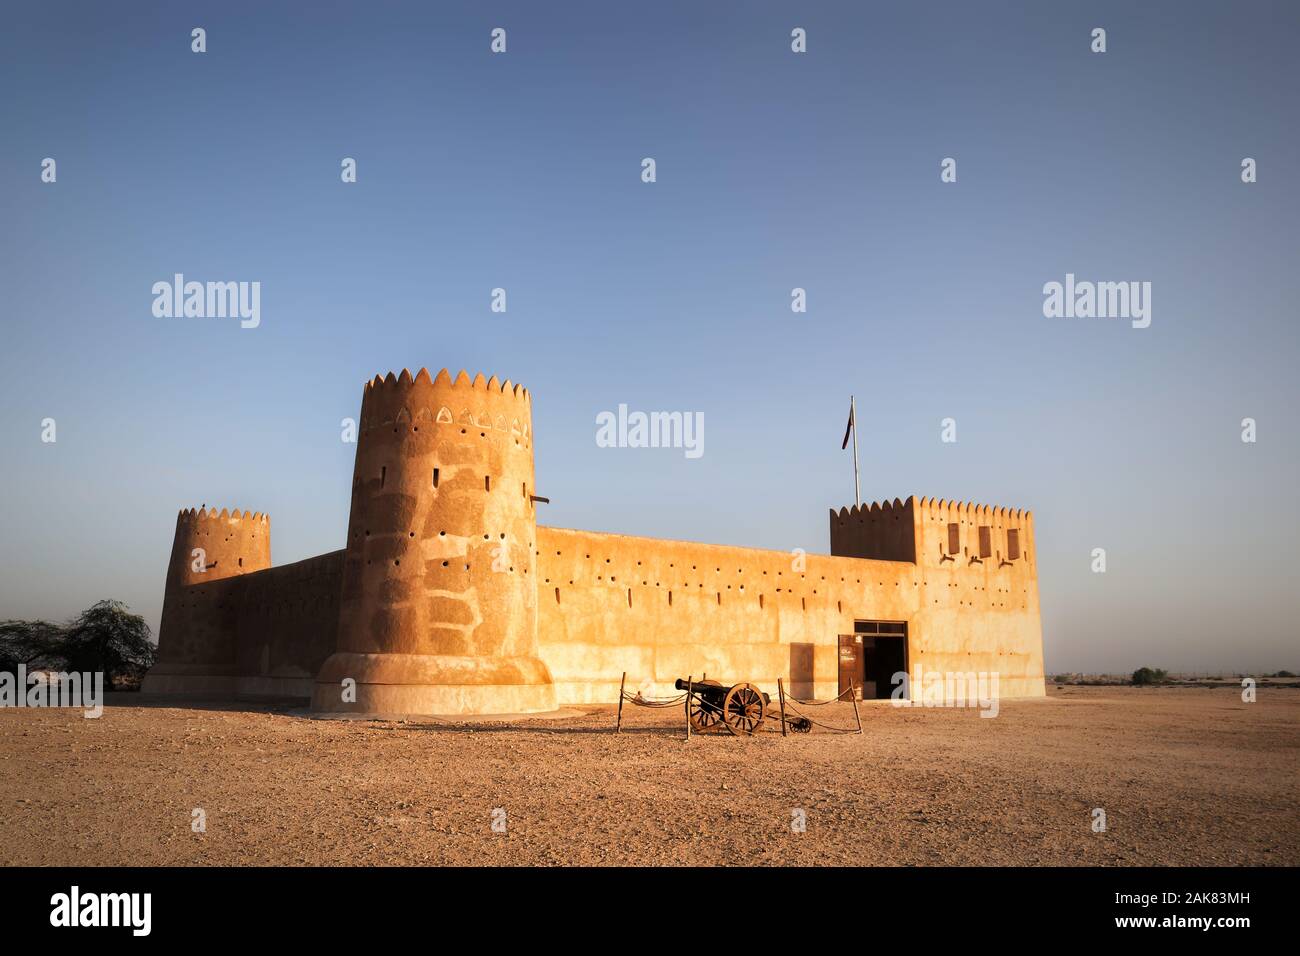 Al Zubara Fort is a historic Qatari military fortress built in 1928. It is one of the main tourist attraction in Qatar. Stock Photo